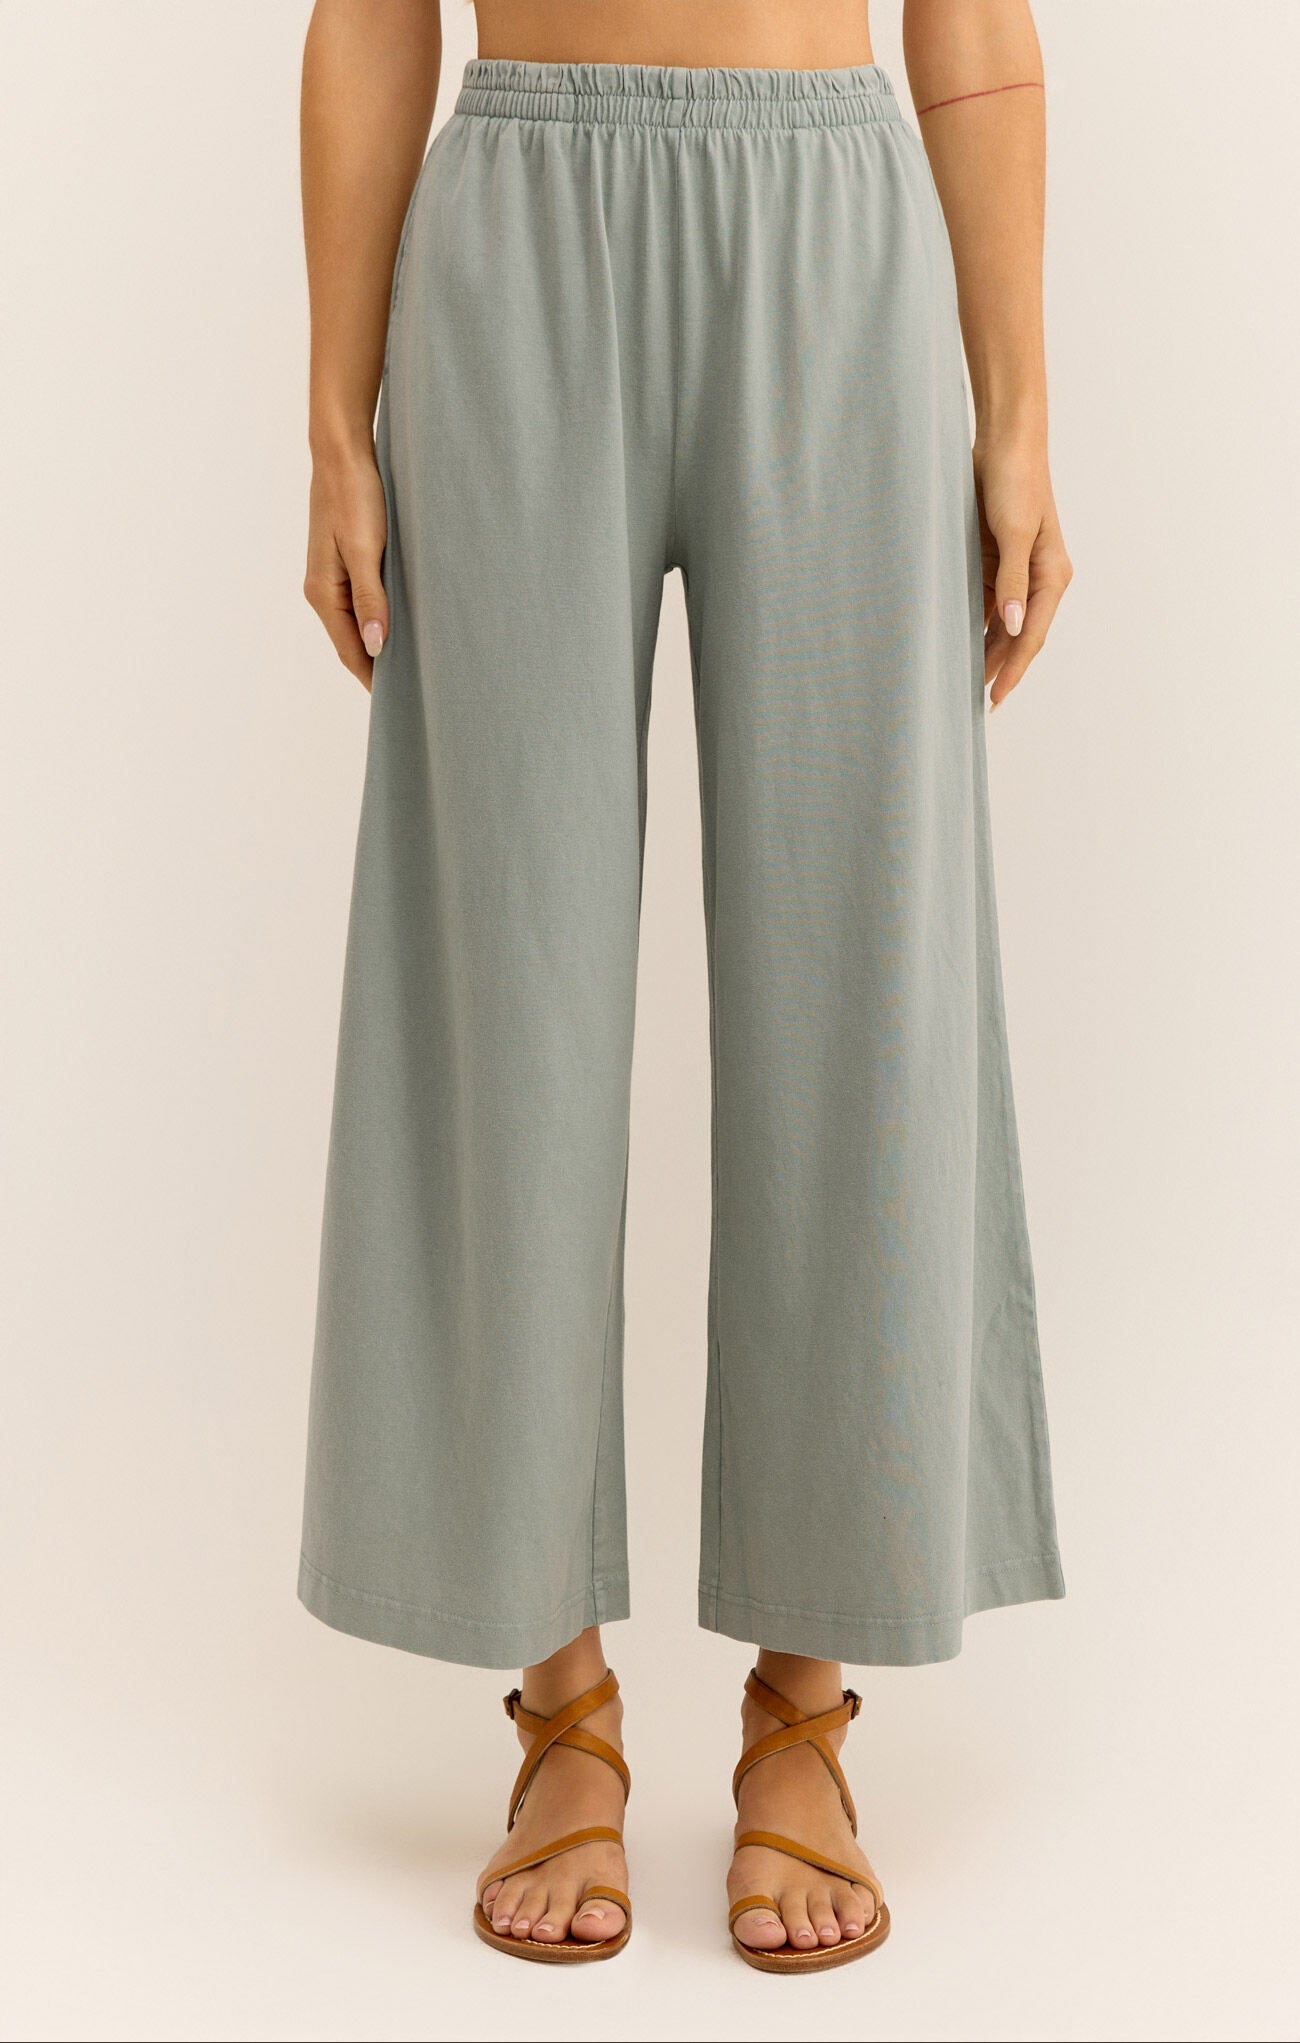 Z SUPPLY SCOUT JERSEY FLARE PANT IN HARBOR GRAY